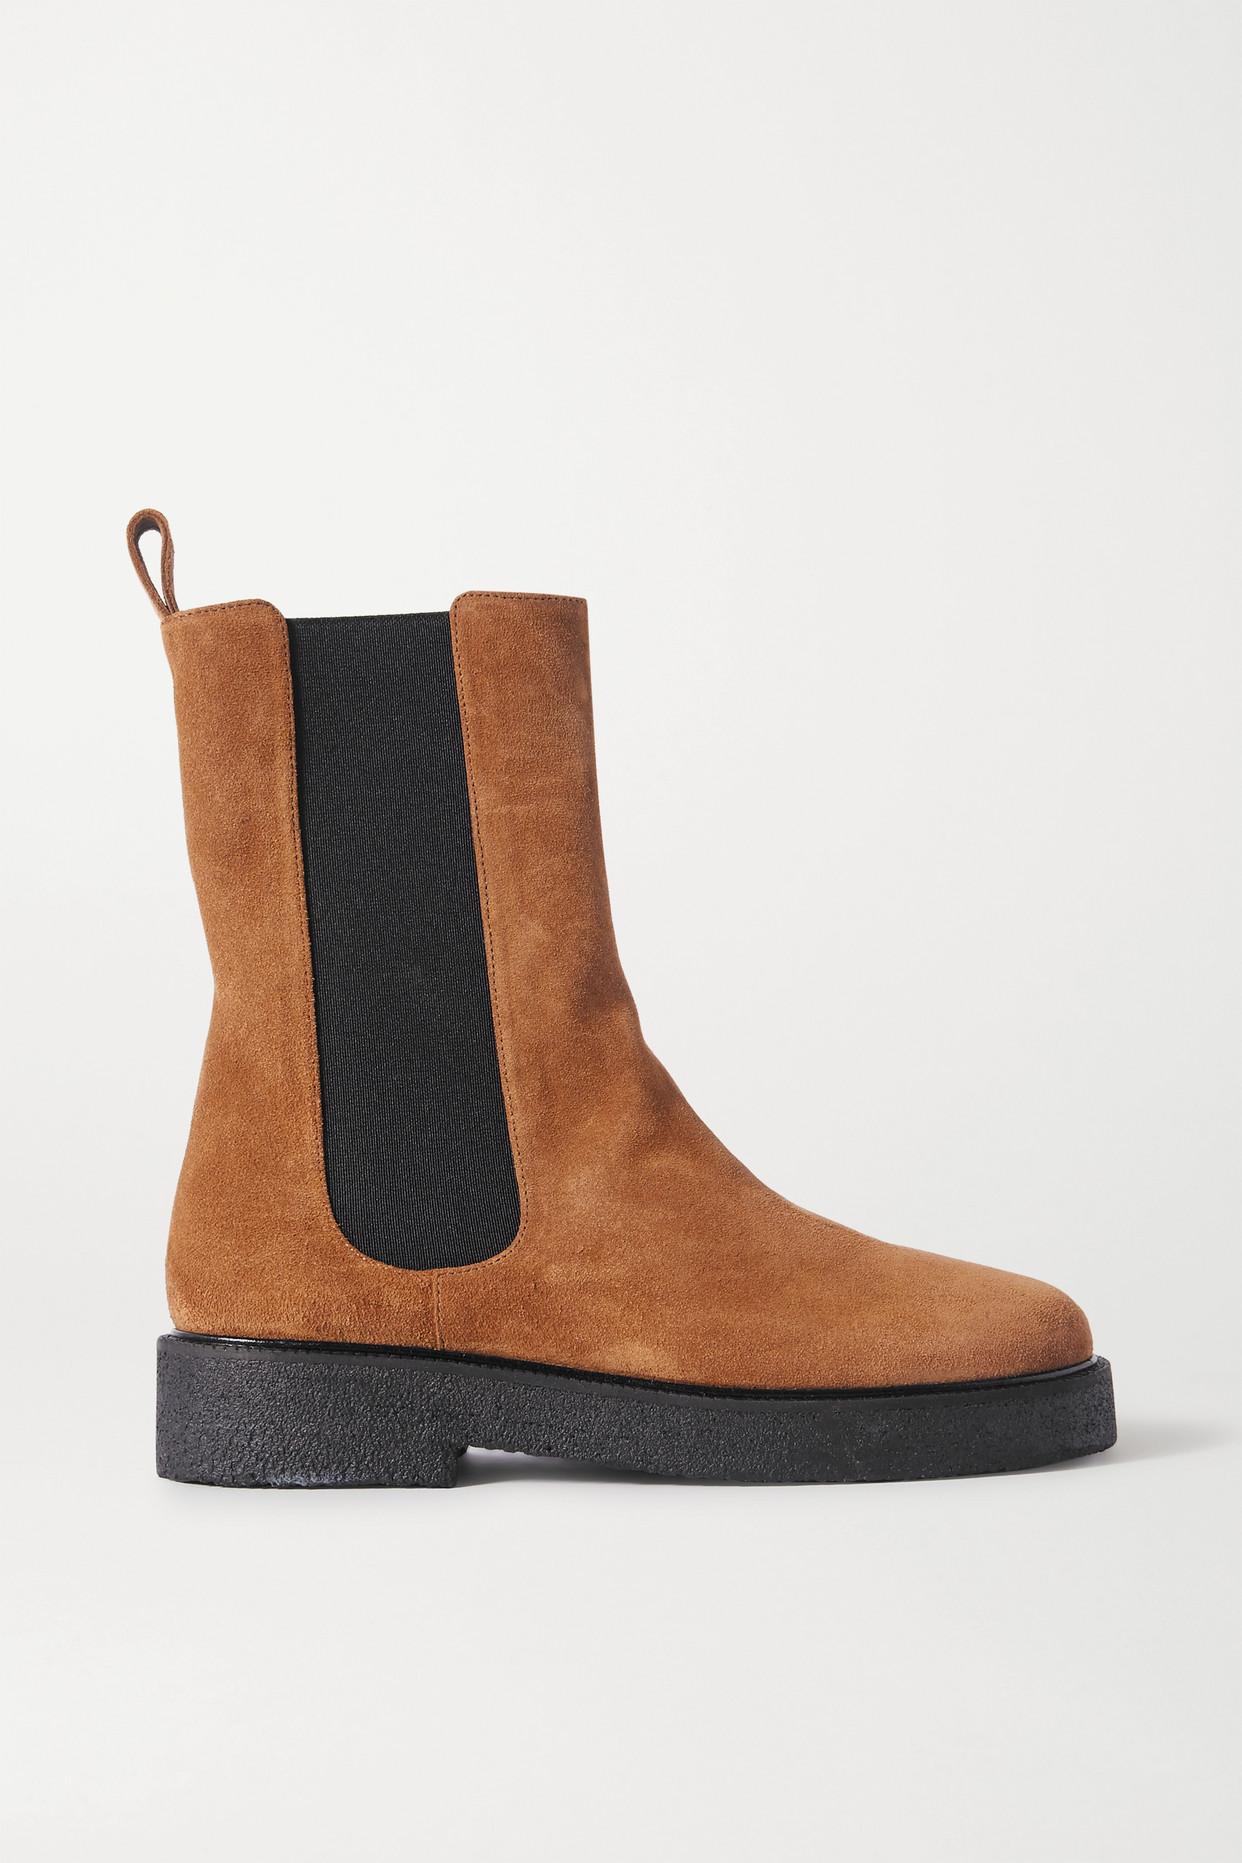 STAUD Palamino Suede Chelsea Boots in Brown | Lyst